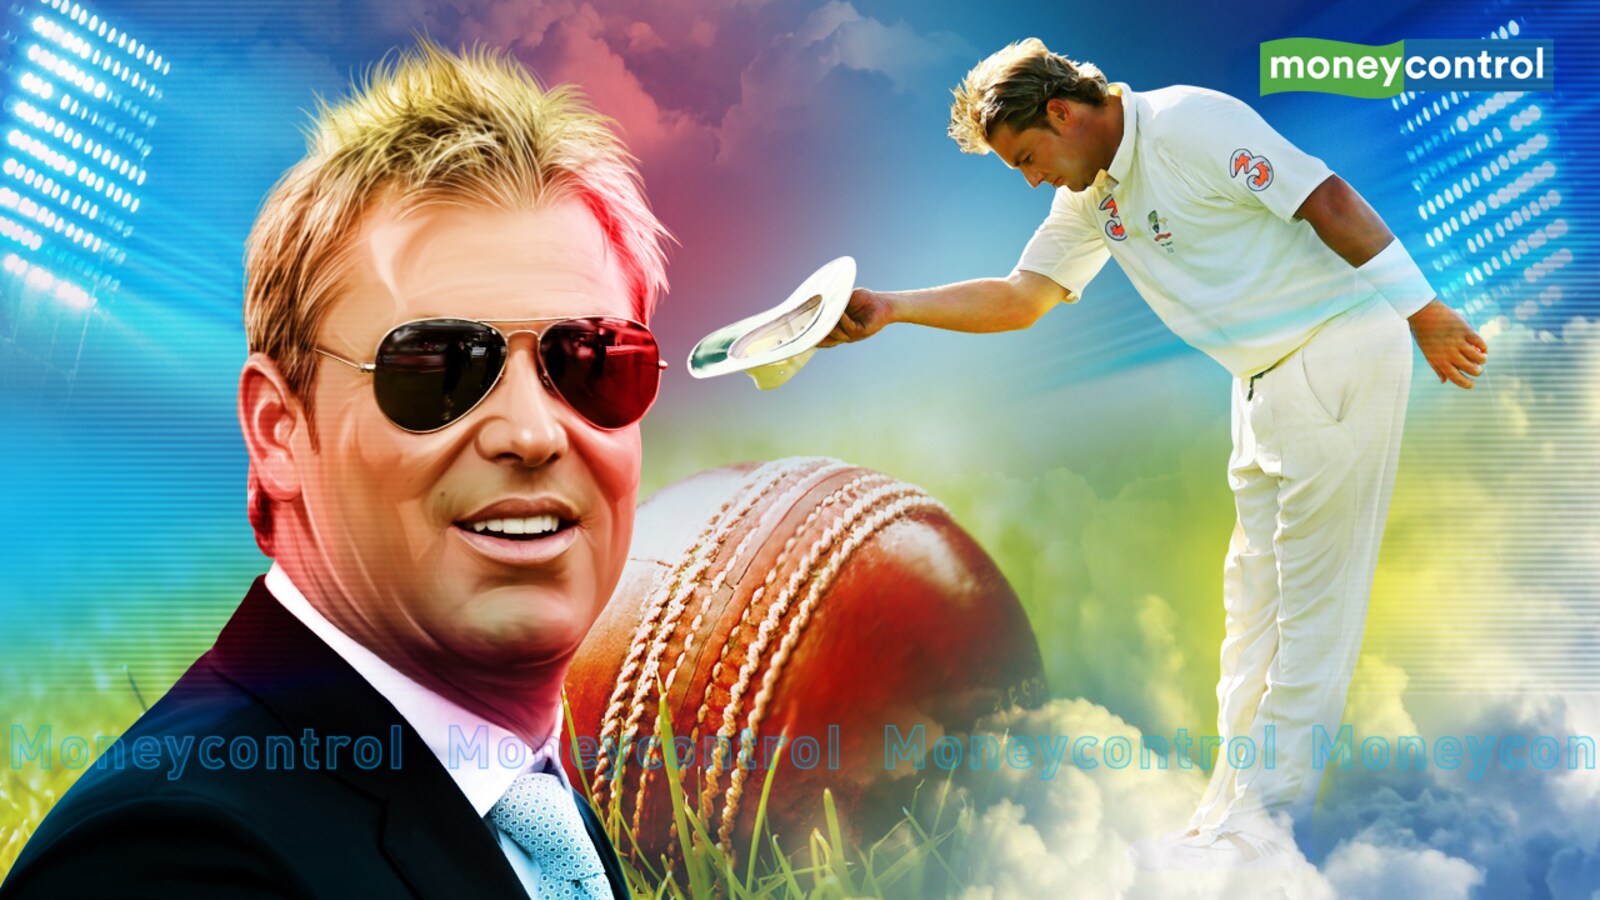 Shane Warne added sheen to the game of cricket